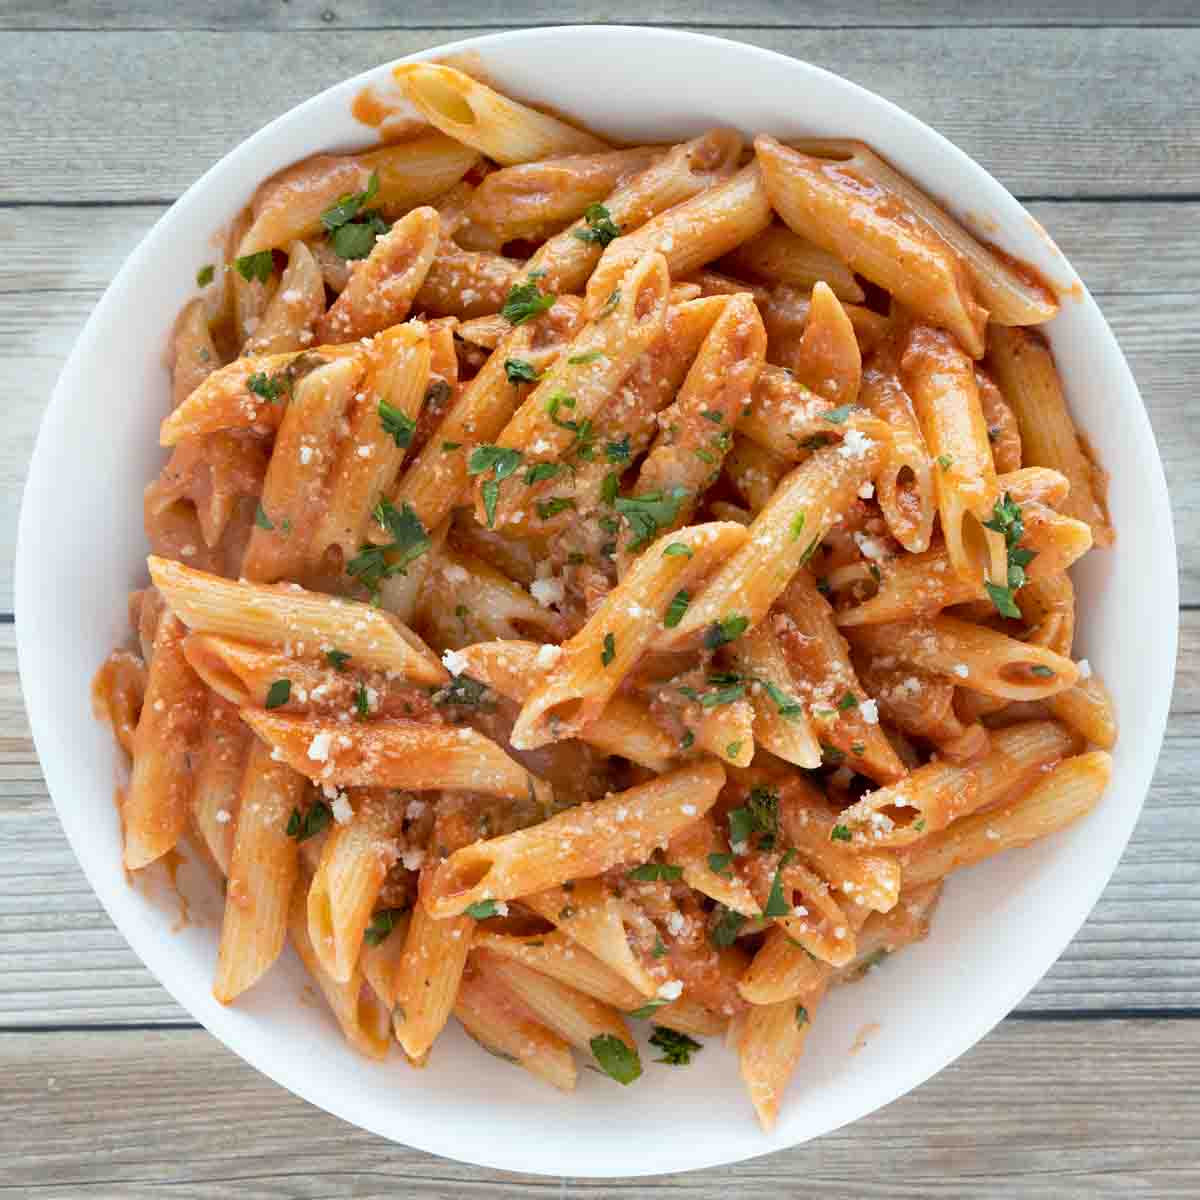 Penne alla Vodka in a white bowl garnished with chopped parsley.